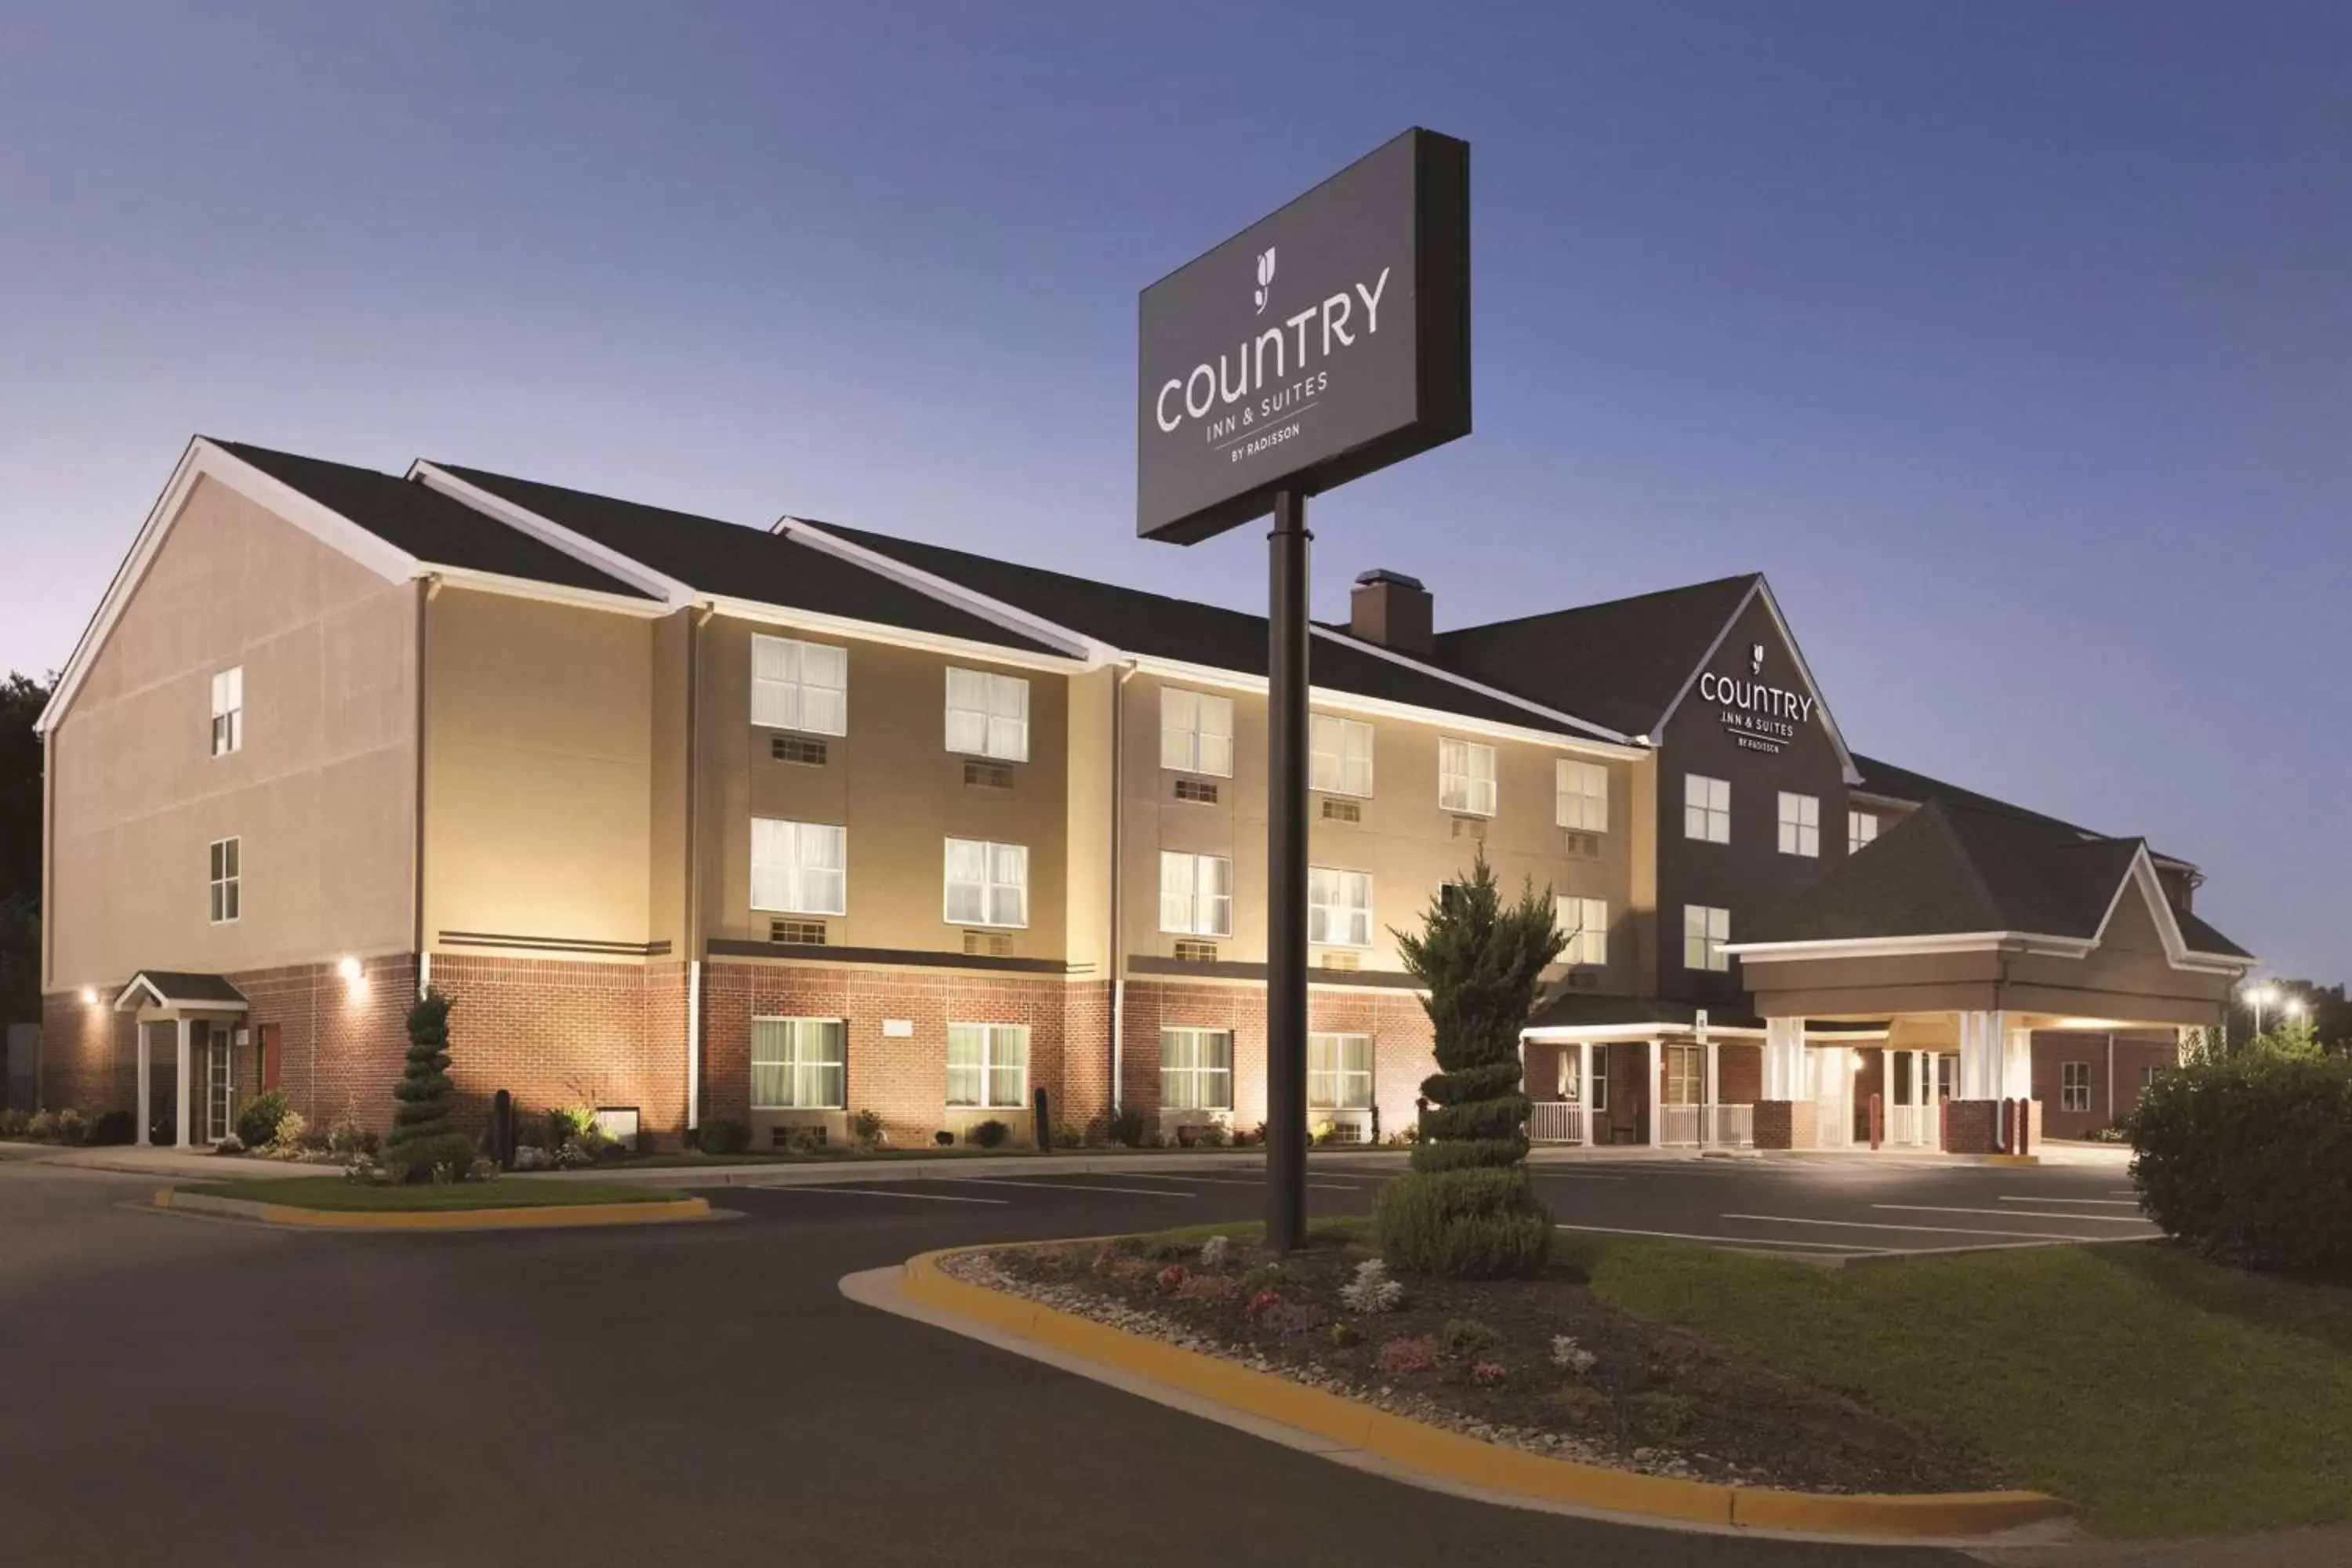 Property building in Country Inn & Suites by Radisson, Washington, D.C. East - Capitol Heights, MD